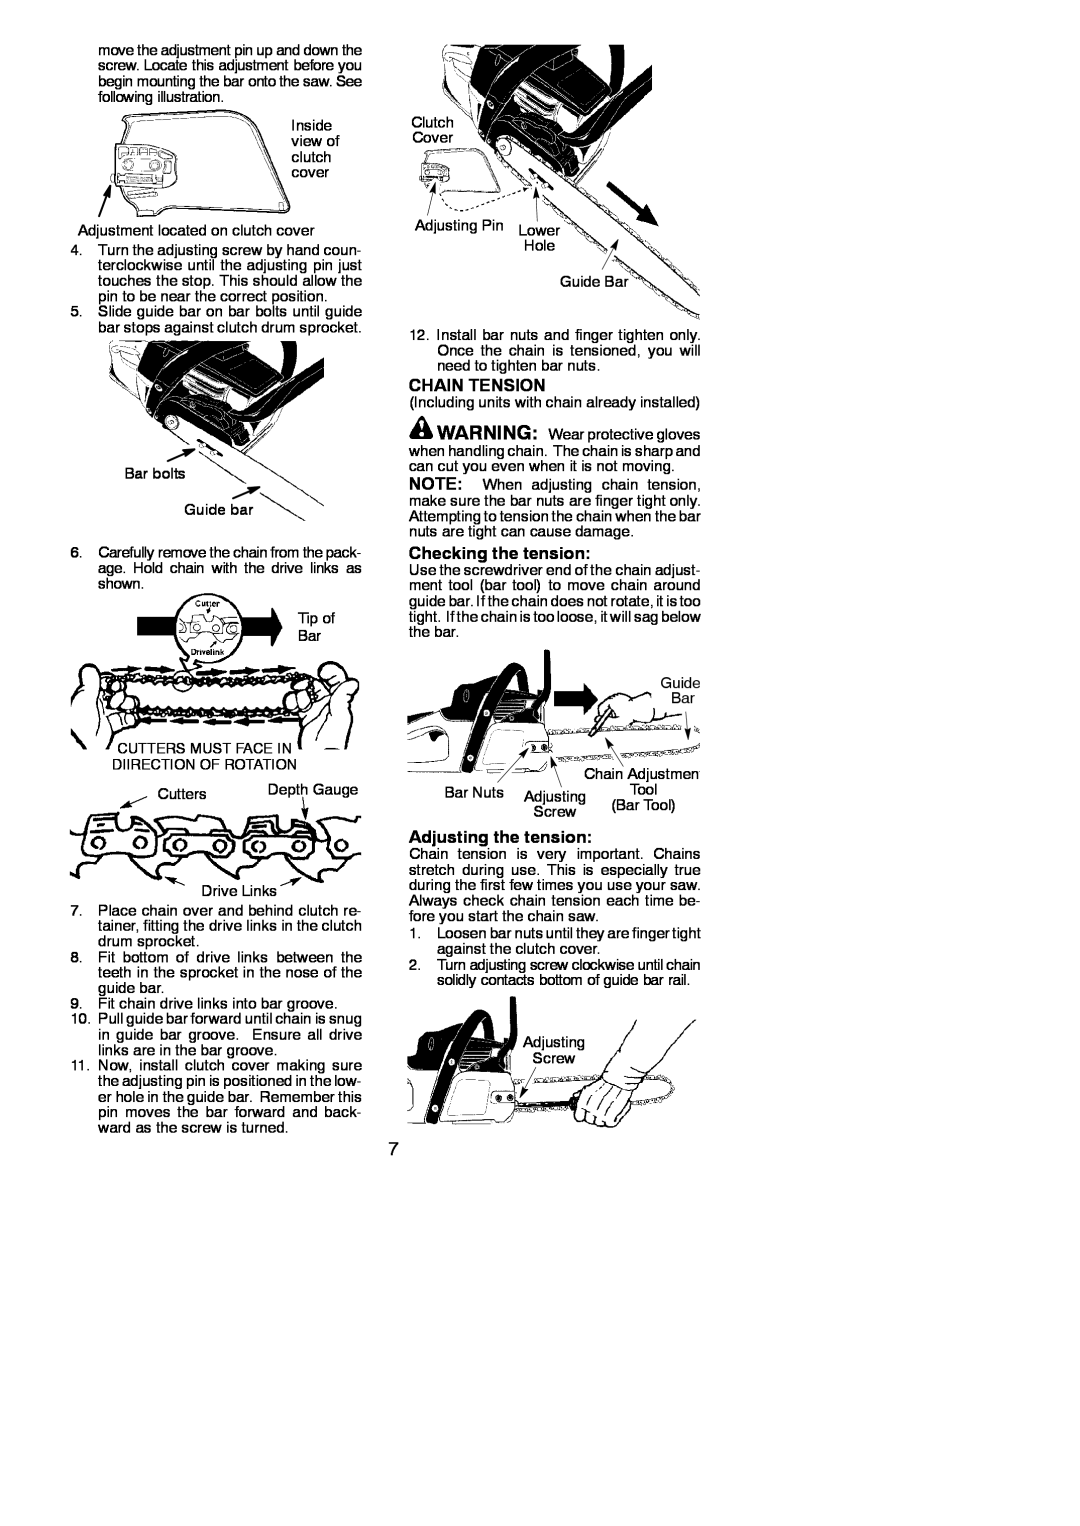 Poulan 545186804 instruction manual Chain Tension, Checking the tension, Adjusting the tension 